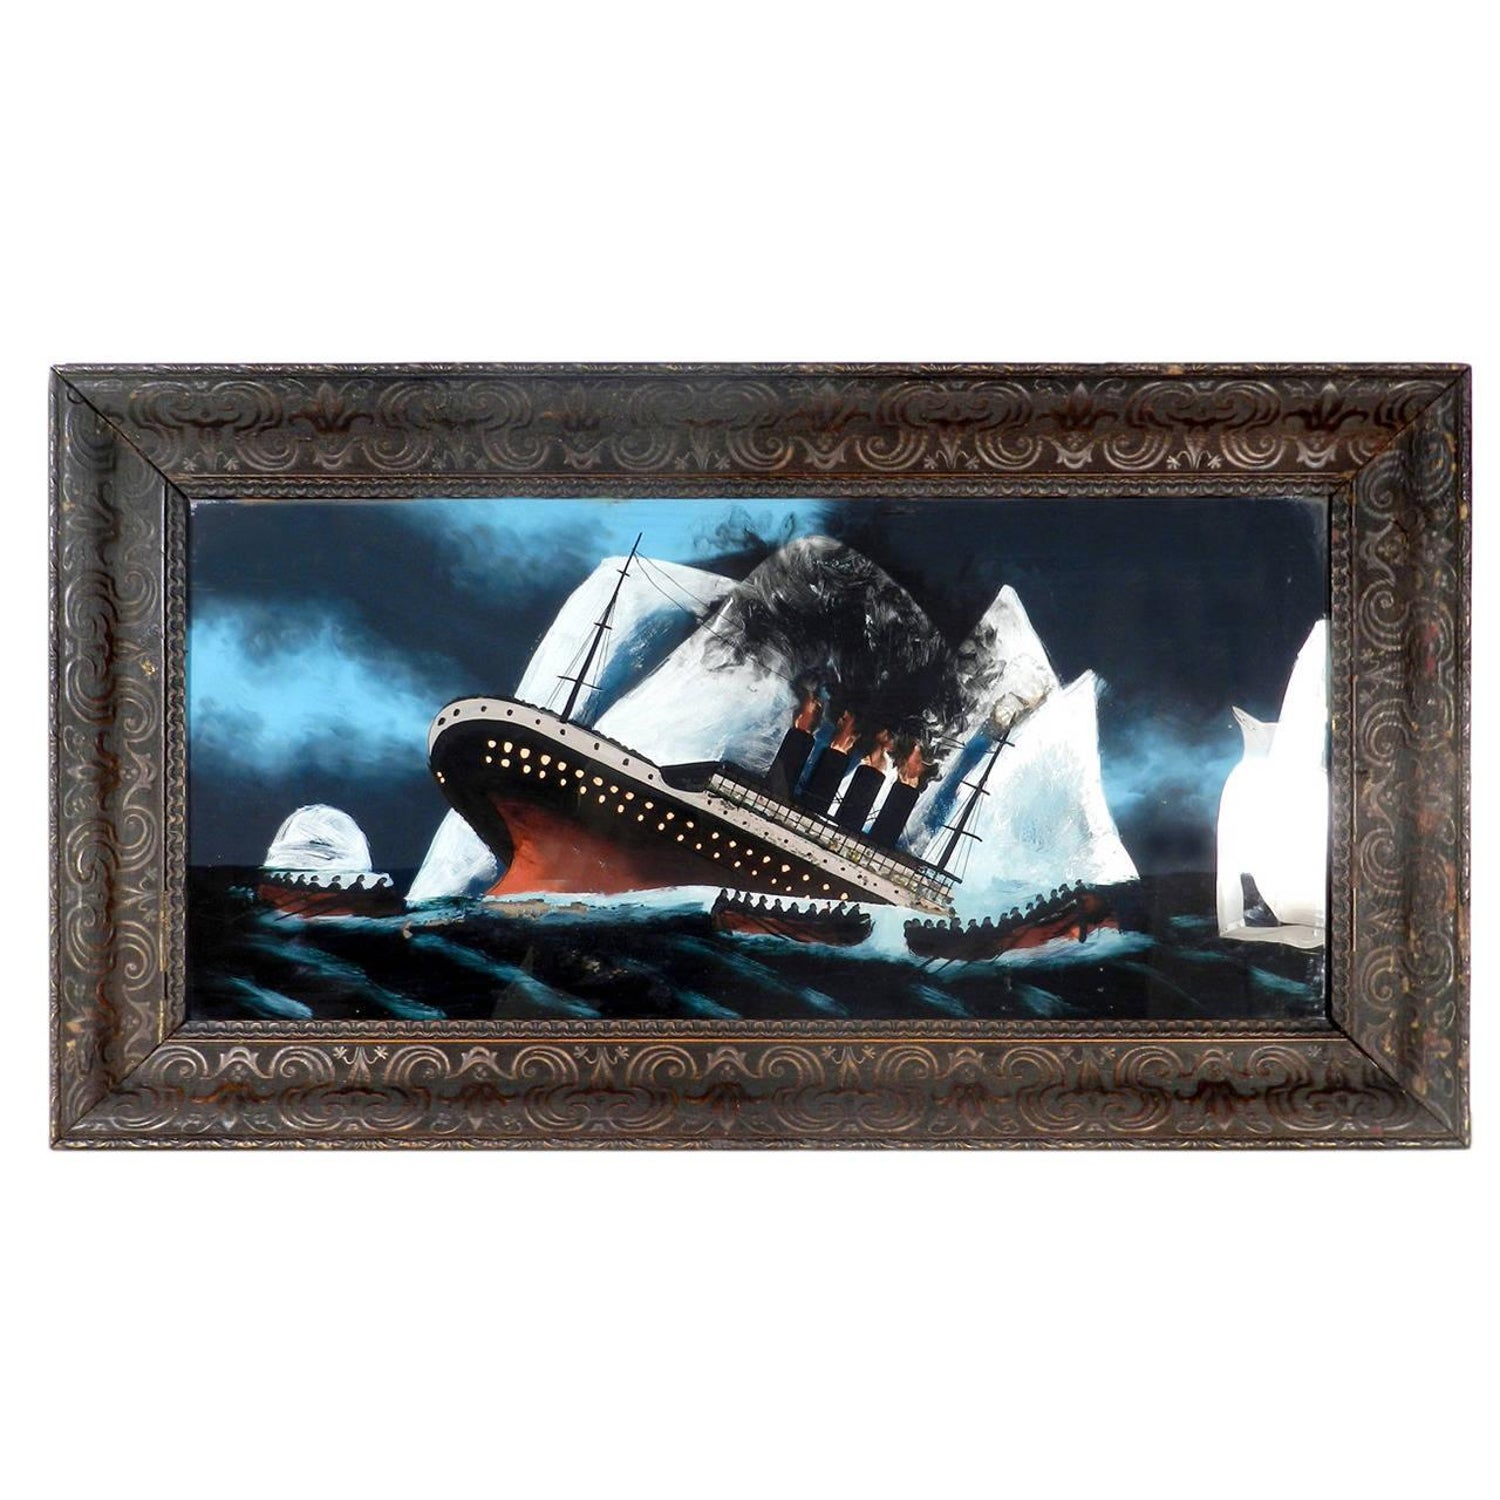 Sinking Titanic Painting Reverse Painted Glass